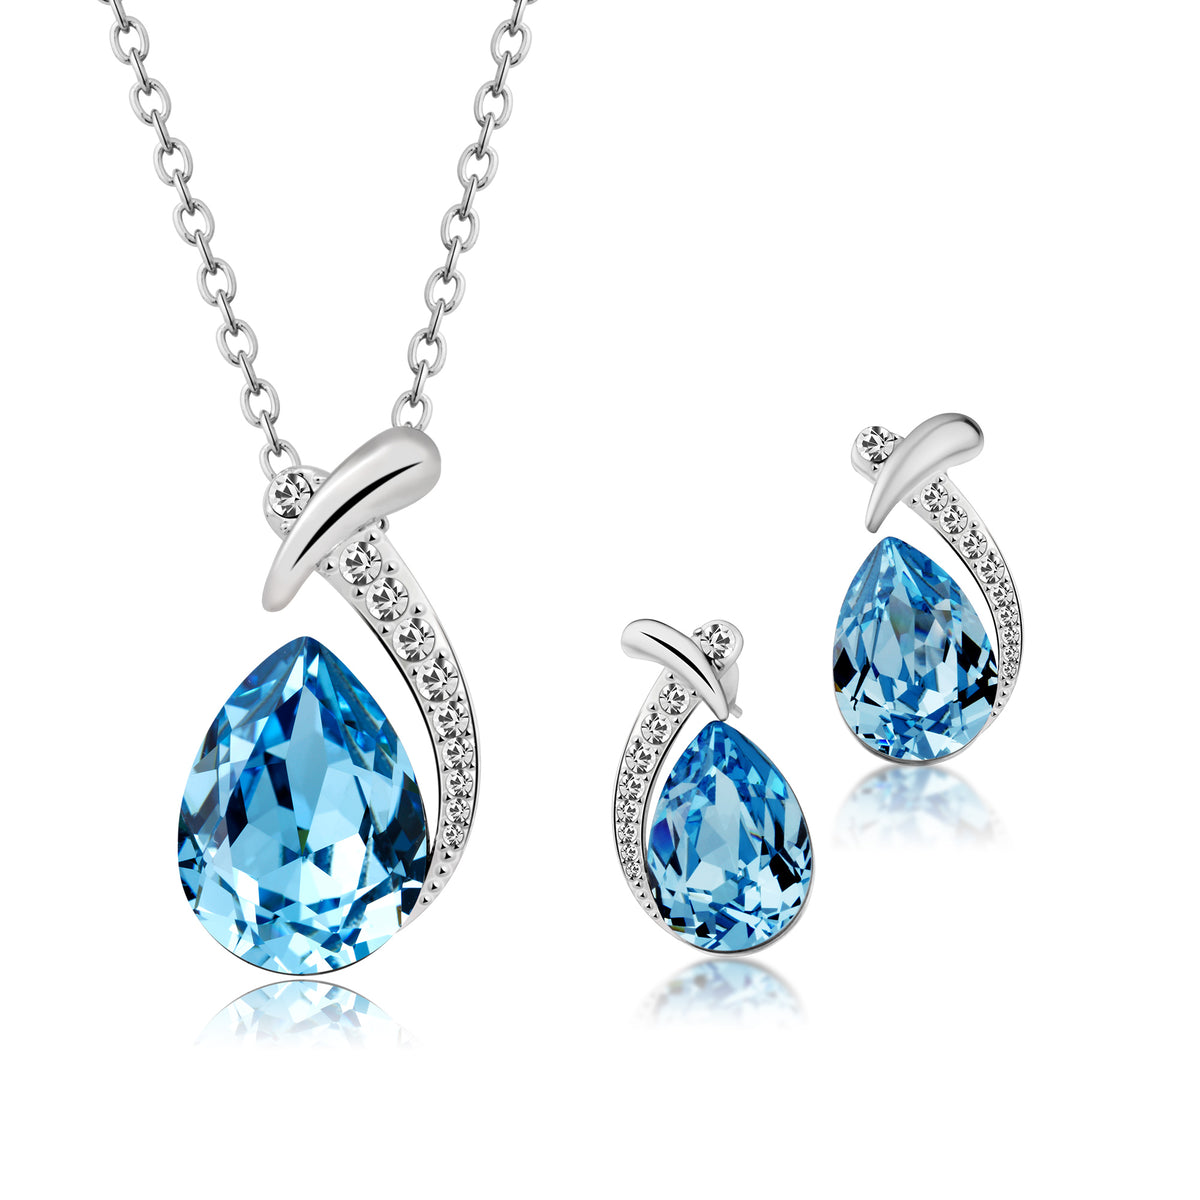 Gifts Are Blue Women's 4 PC Water Drop Jewelry Set